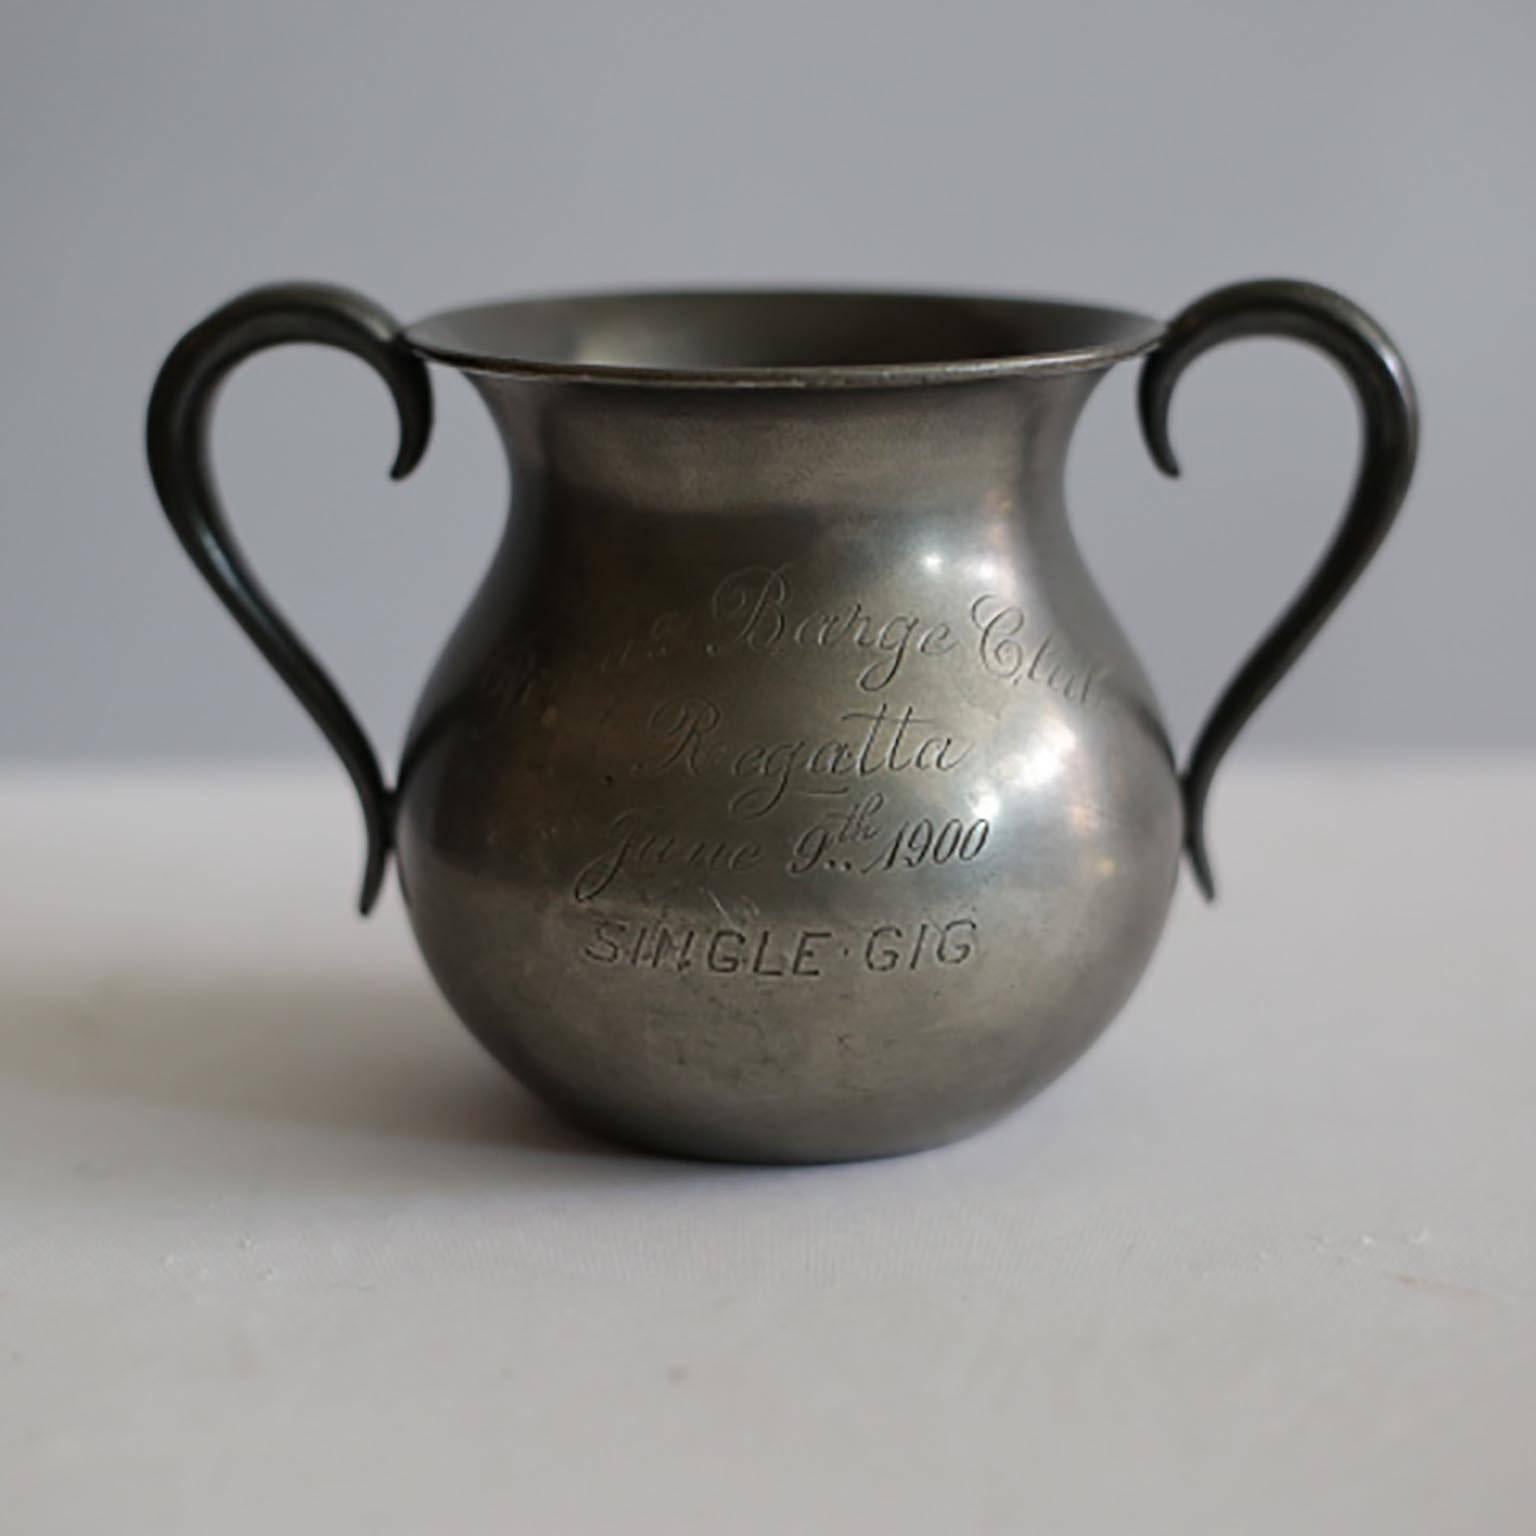 Silver plated rowing trophy engraved circa 1900. Great as a vase for flowers.